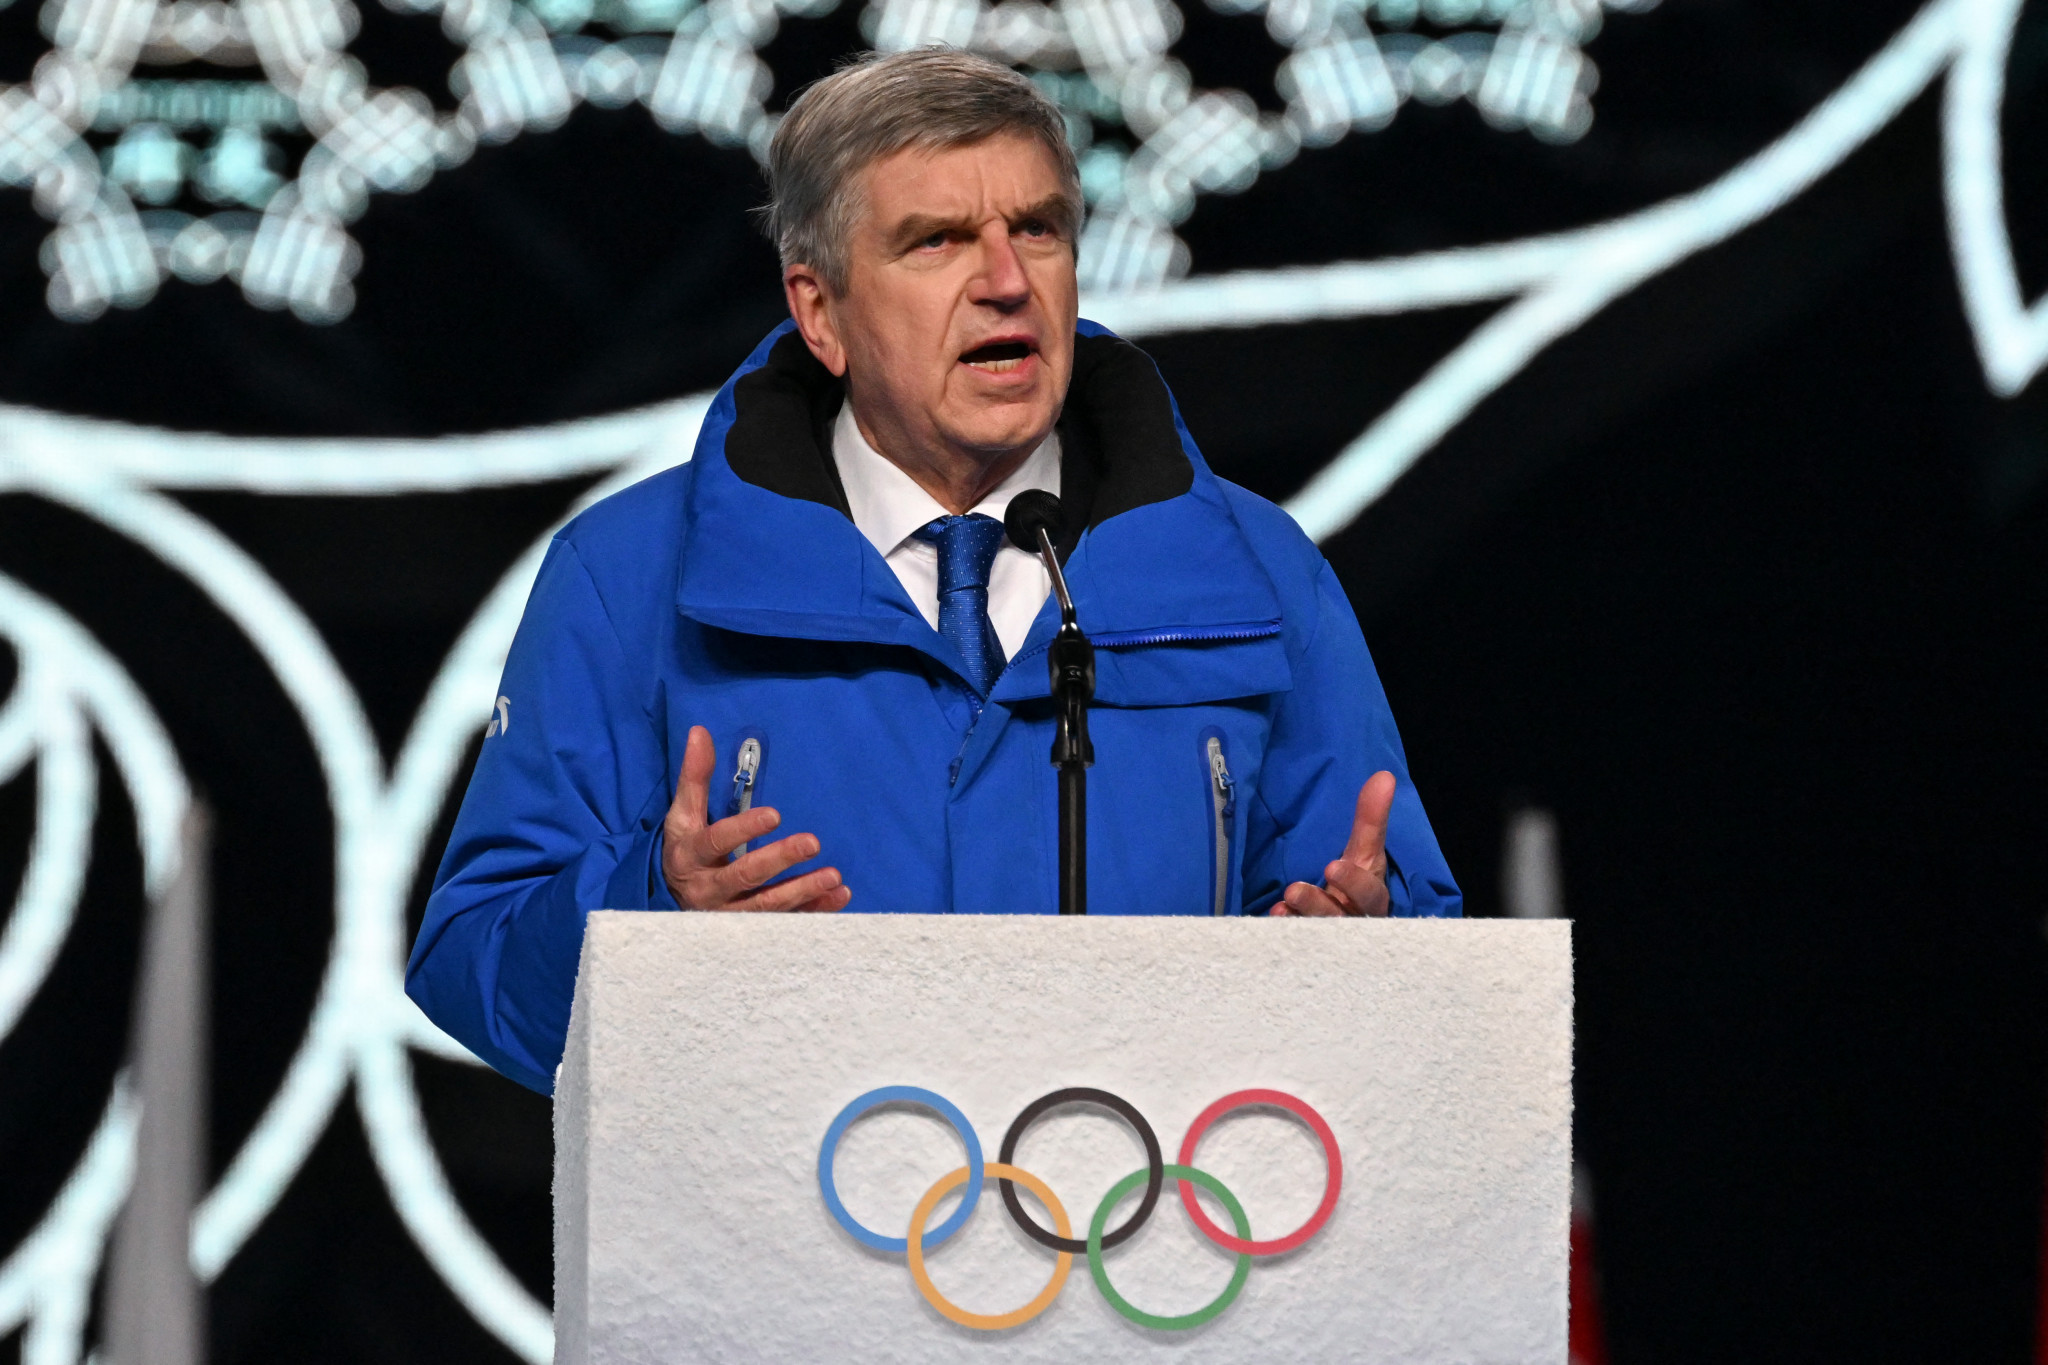 International Olympic Committee President Thomas Bach called on world leaders to 